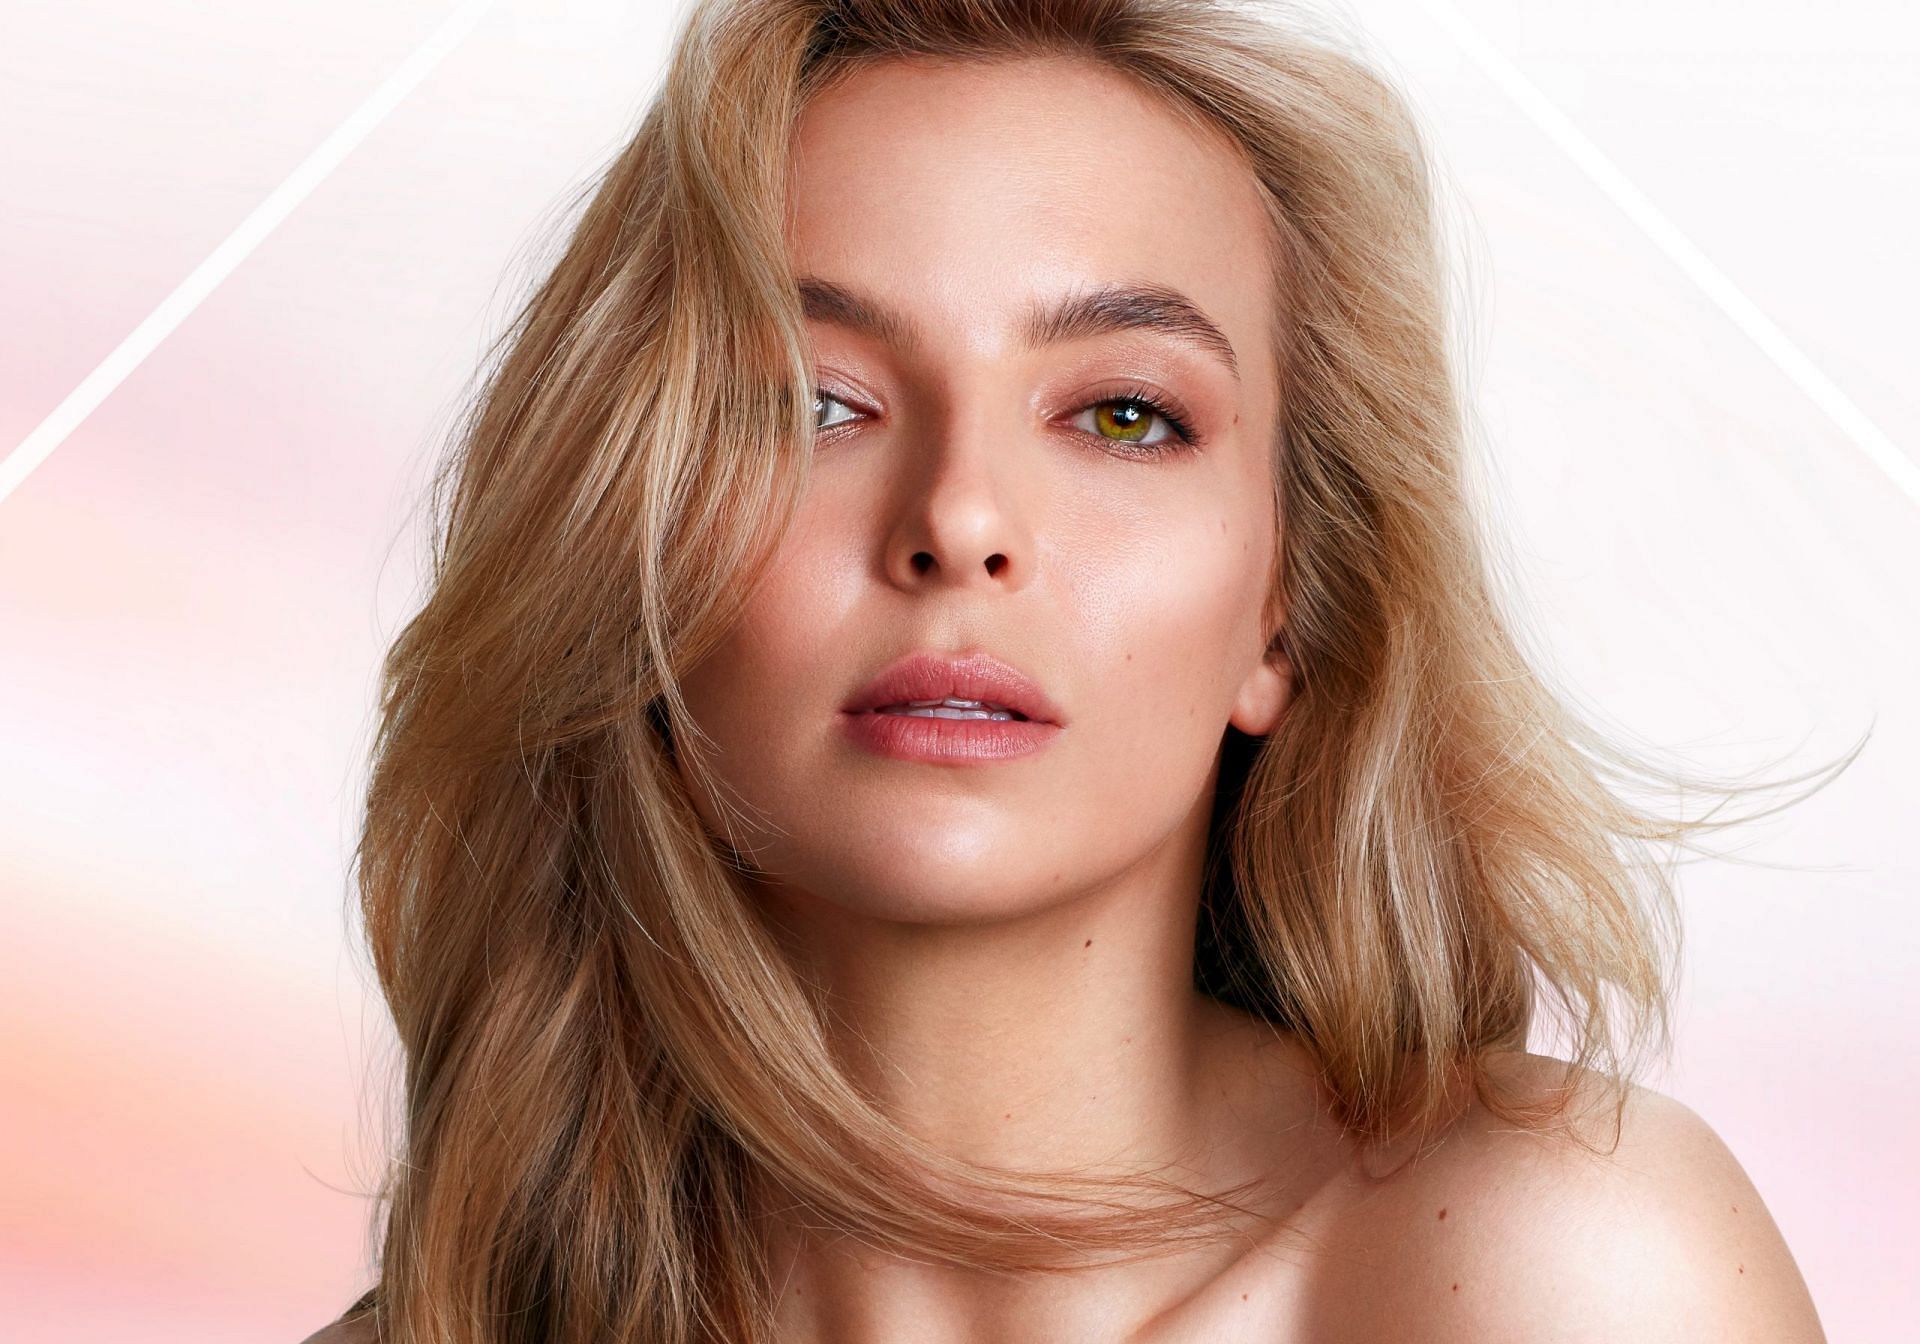 Jodie Comer ranked the most beautiful woman in the world (image via Noble Panacea)